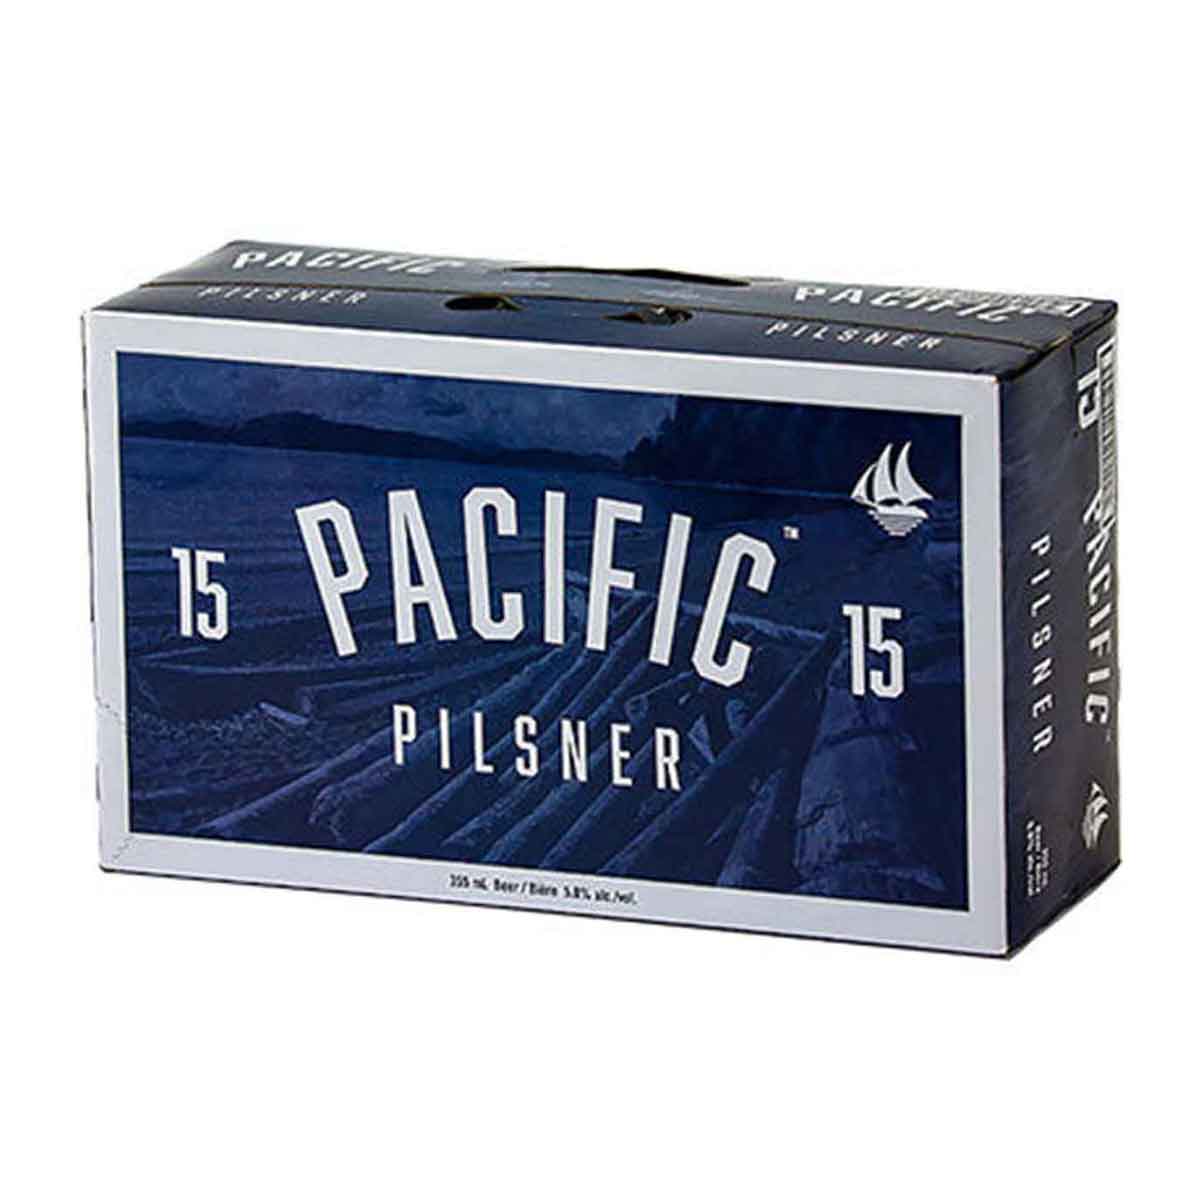 TAG Liquor Stores BC-PACIFIC PILSNER 15 CANS